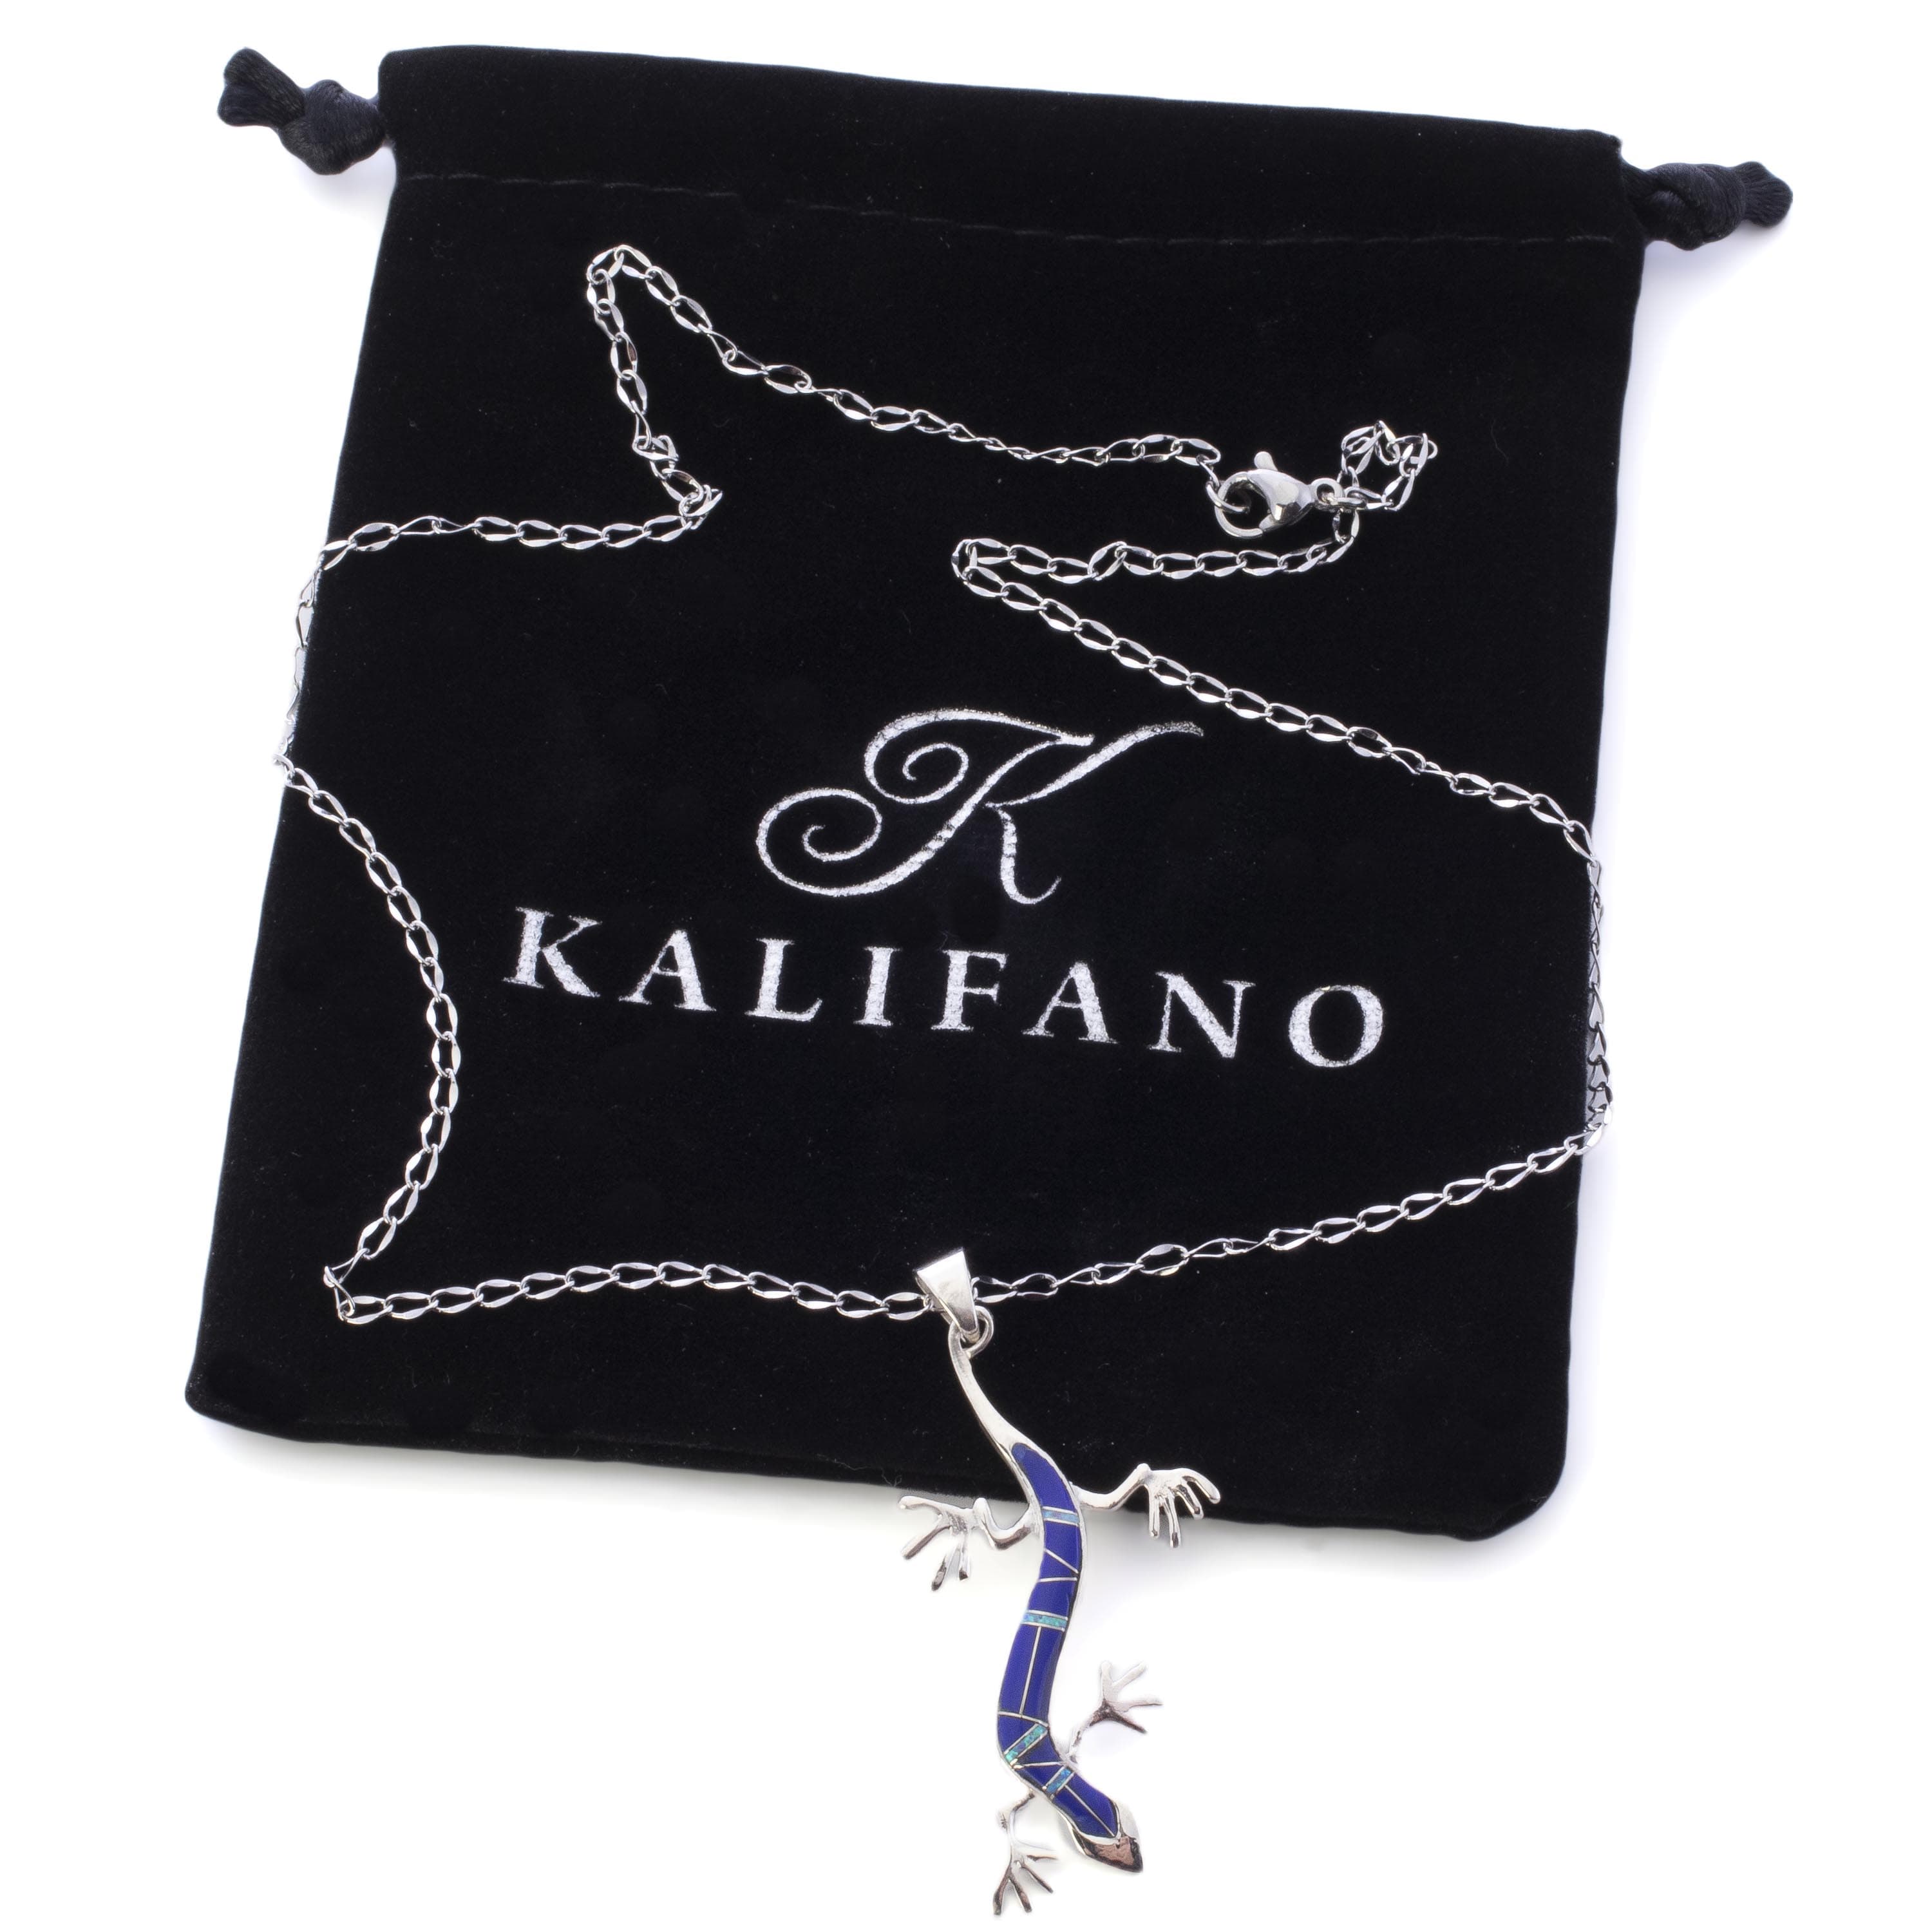 Kalifano Southwest Silver Jewelry Lapis Lizard 925 Sterling Silver Pendant USA Handmade with Opal Accent NMN.2164.LP